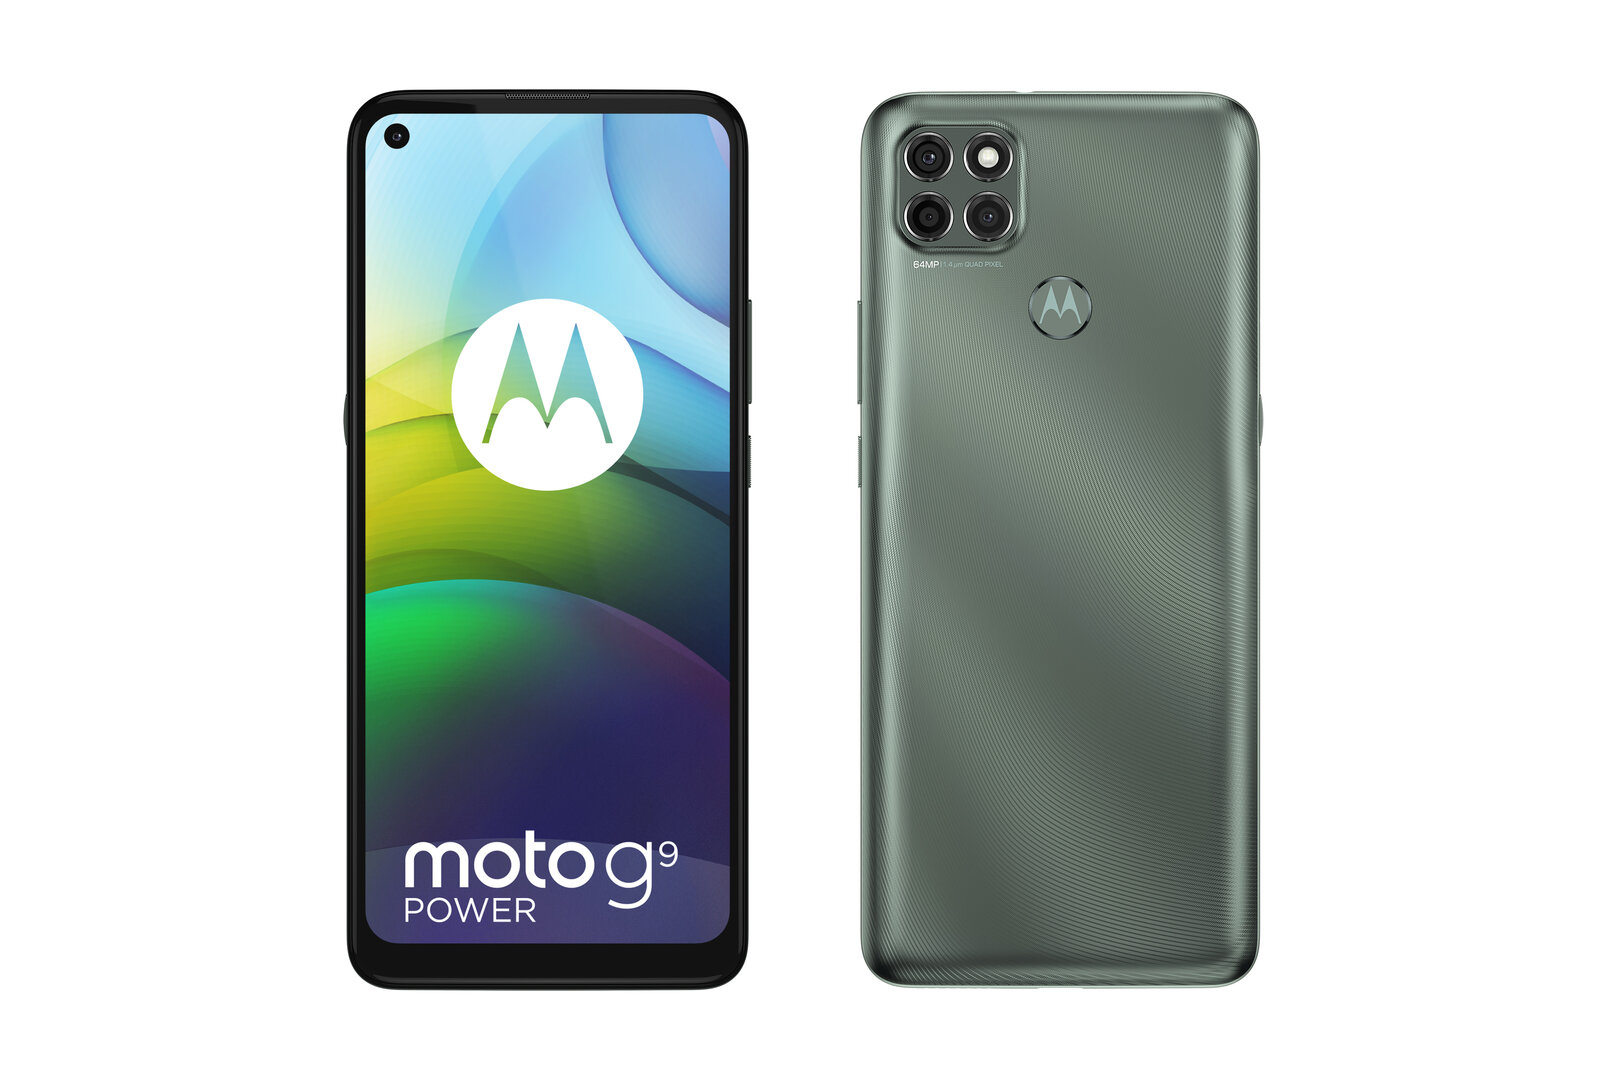 Motorola unveils the Moto G9 Power with a